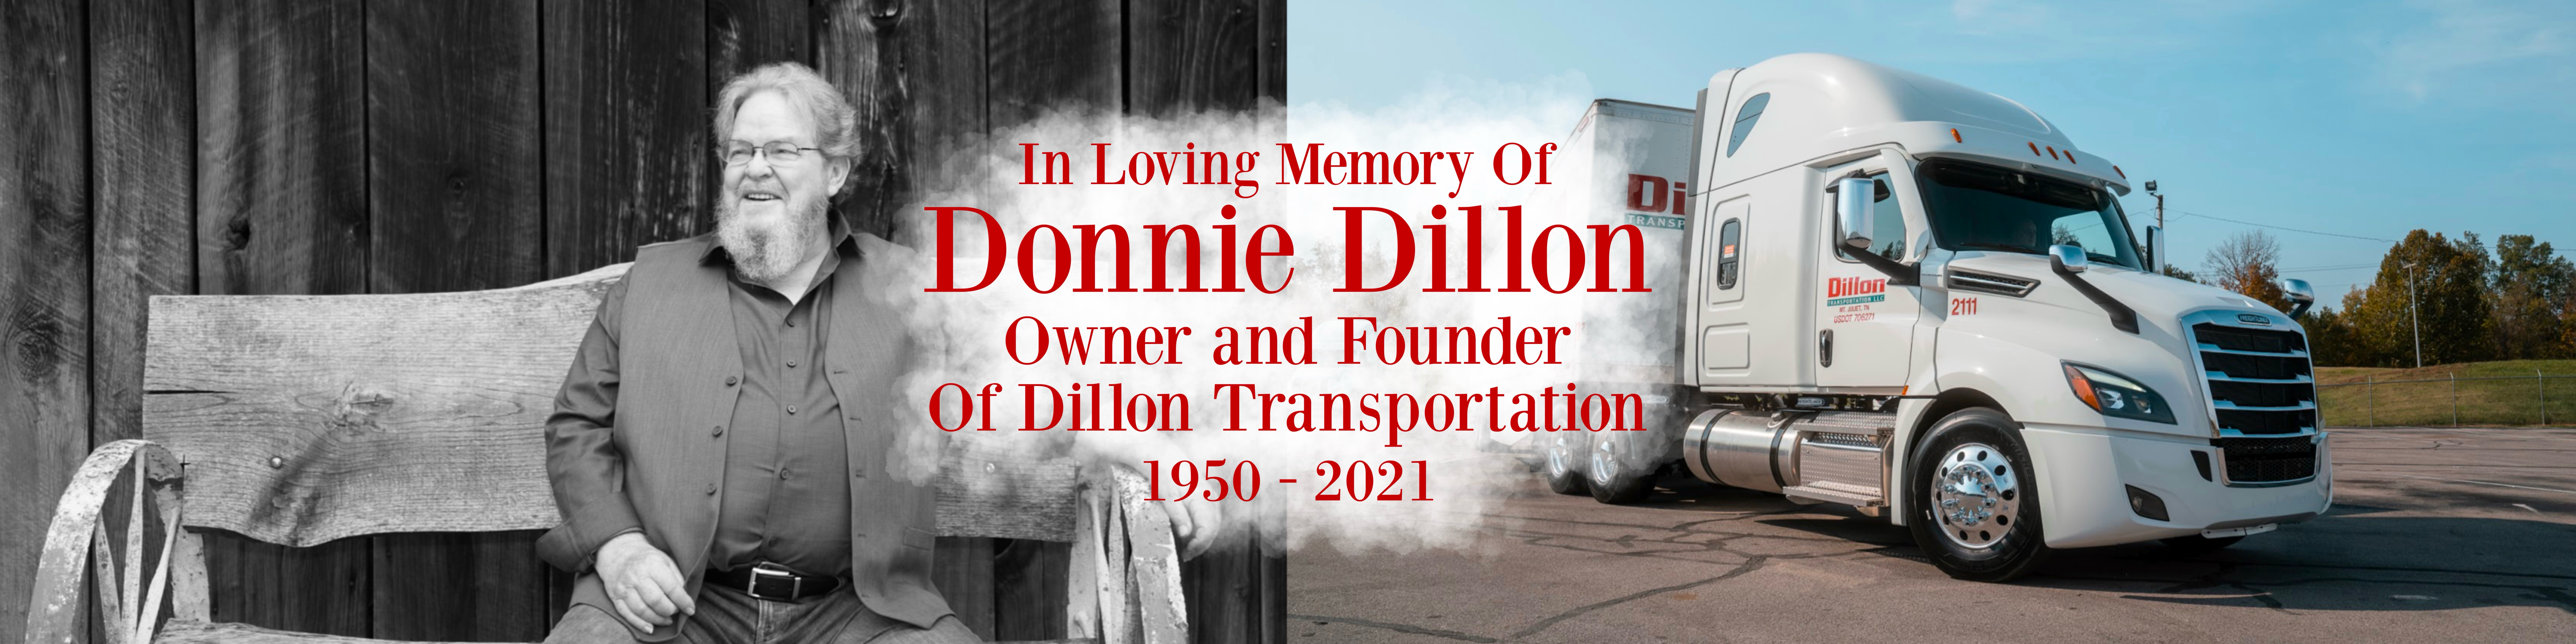 in loving memory of donnie dillon owner and founder of dillon transportation